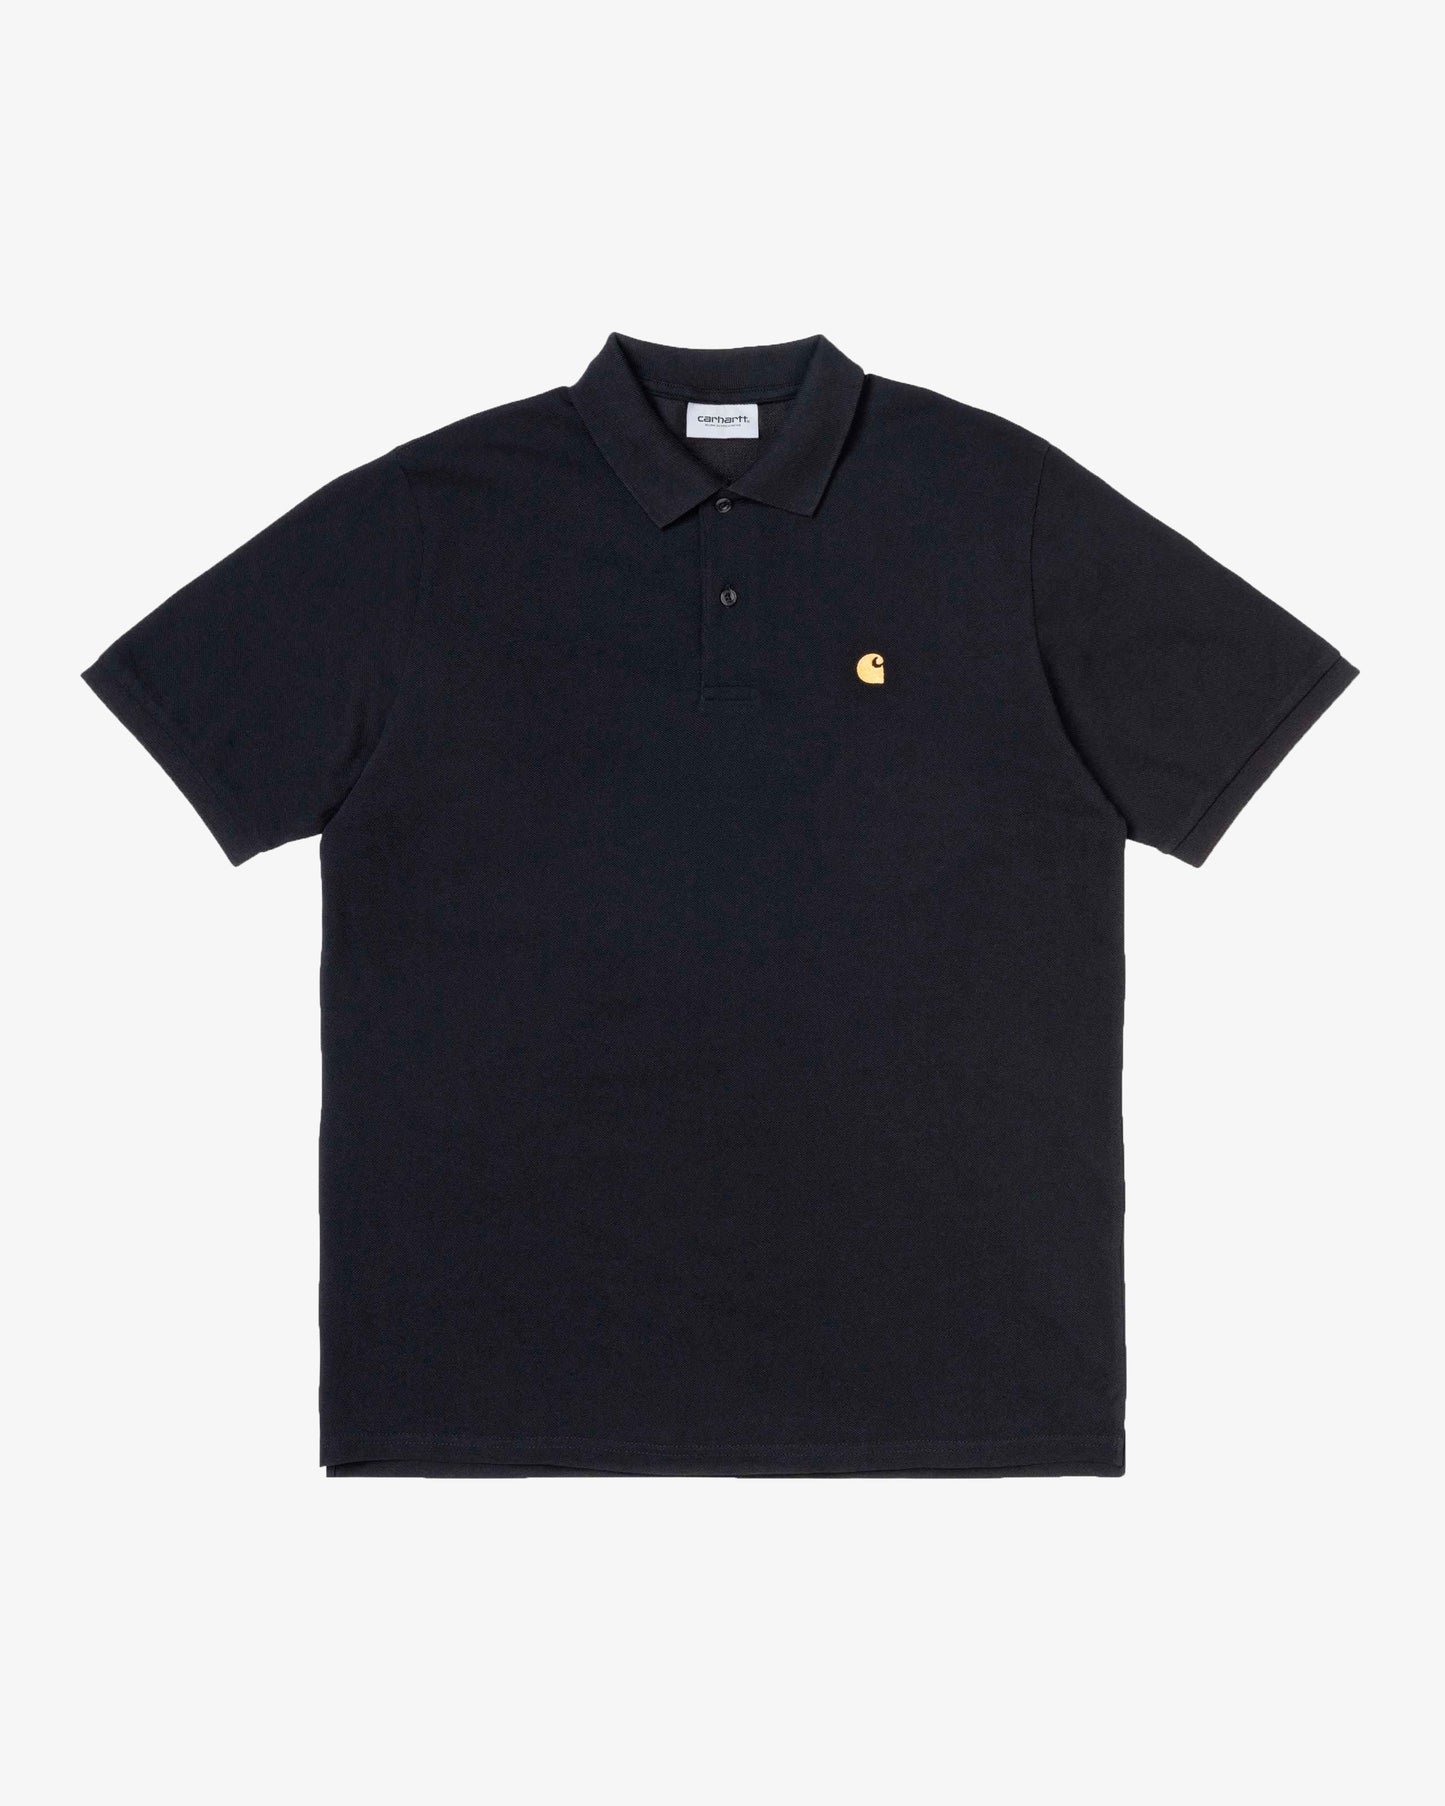 Carhartt WIP S/S Chase Pique